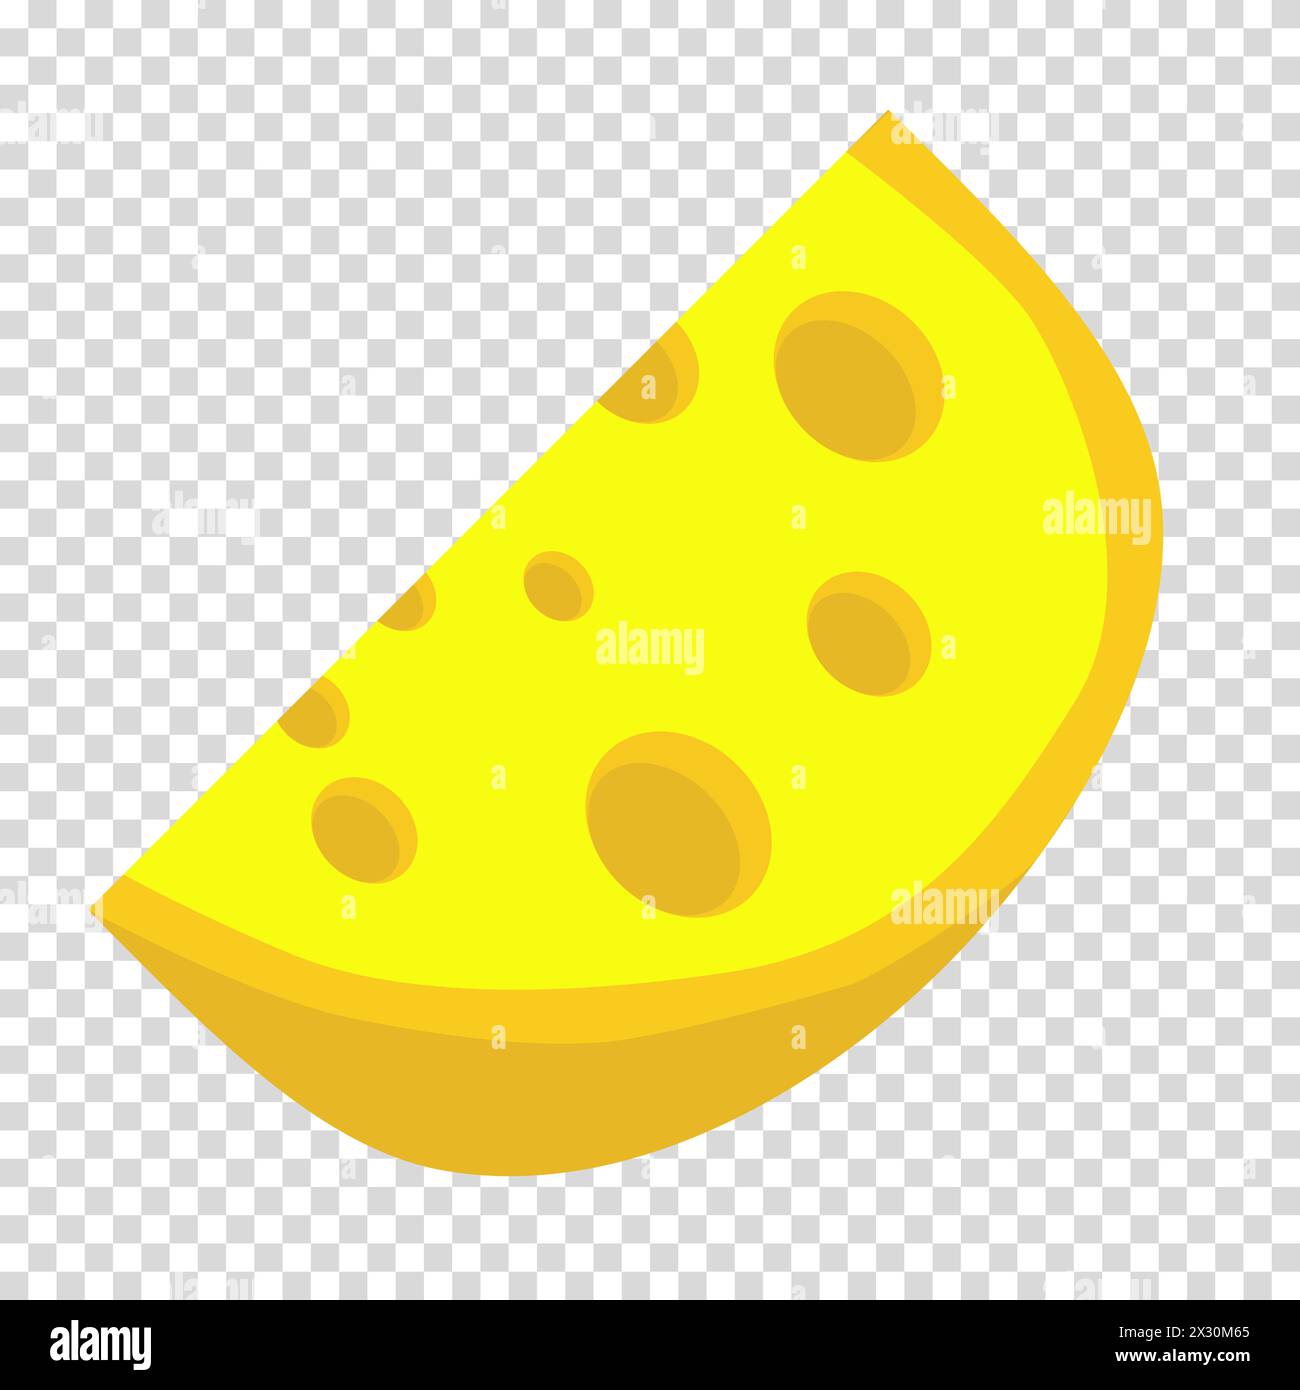 Yellow cheddar cheese with holes, cheese making, product, snack, flat design, simple image, cartoon style. Fermented milk products store concept. Vect Stock Vector